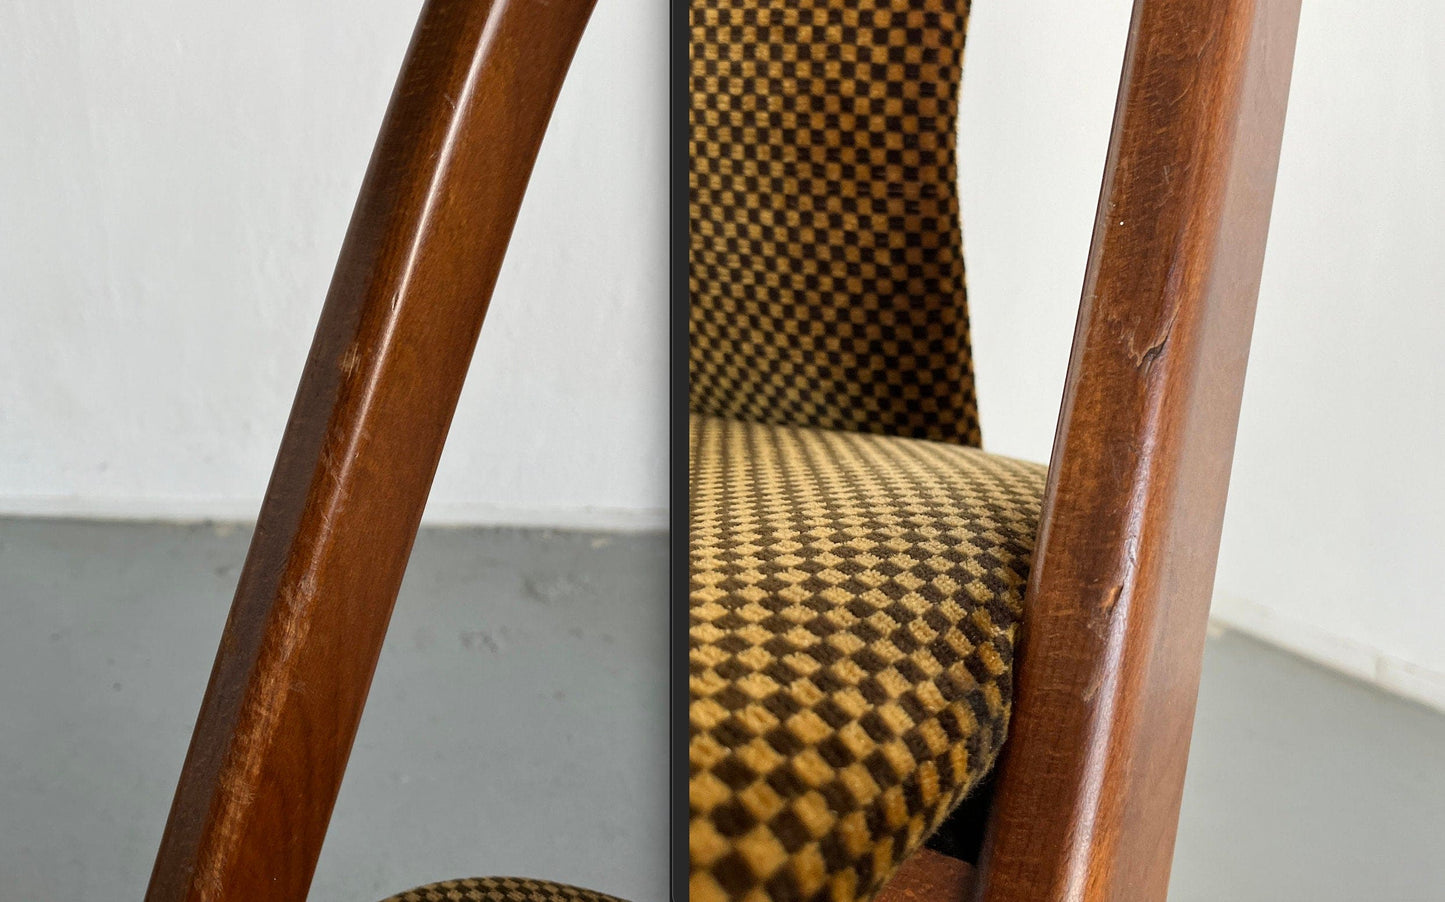 1 of 5 Mid-Century Modern Elegant Dining Chairs with Checkered Upholstery and Curved Wooden Frame, Germany 1970s Vintage